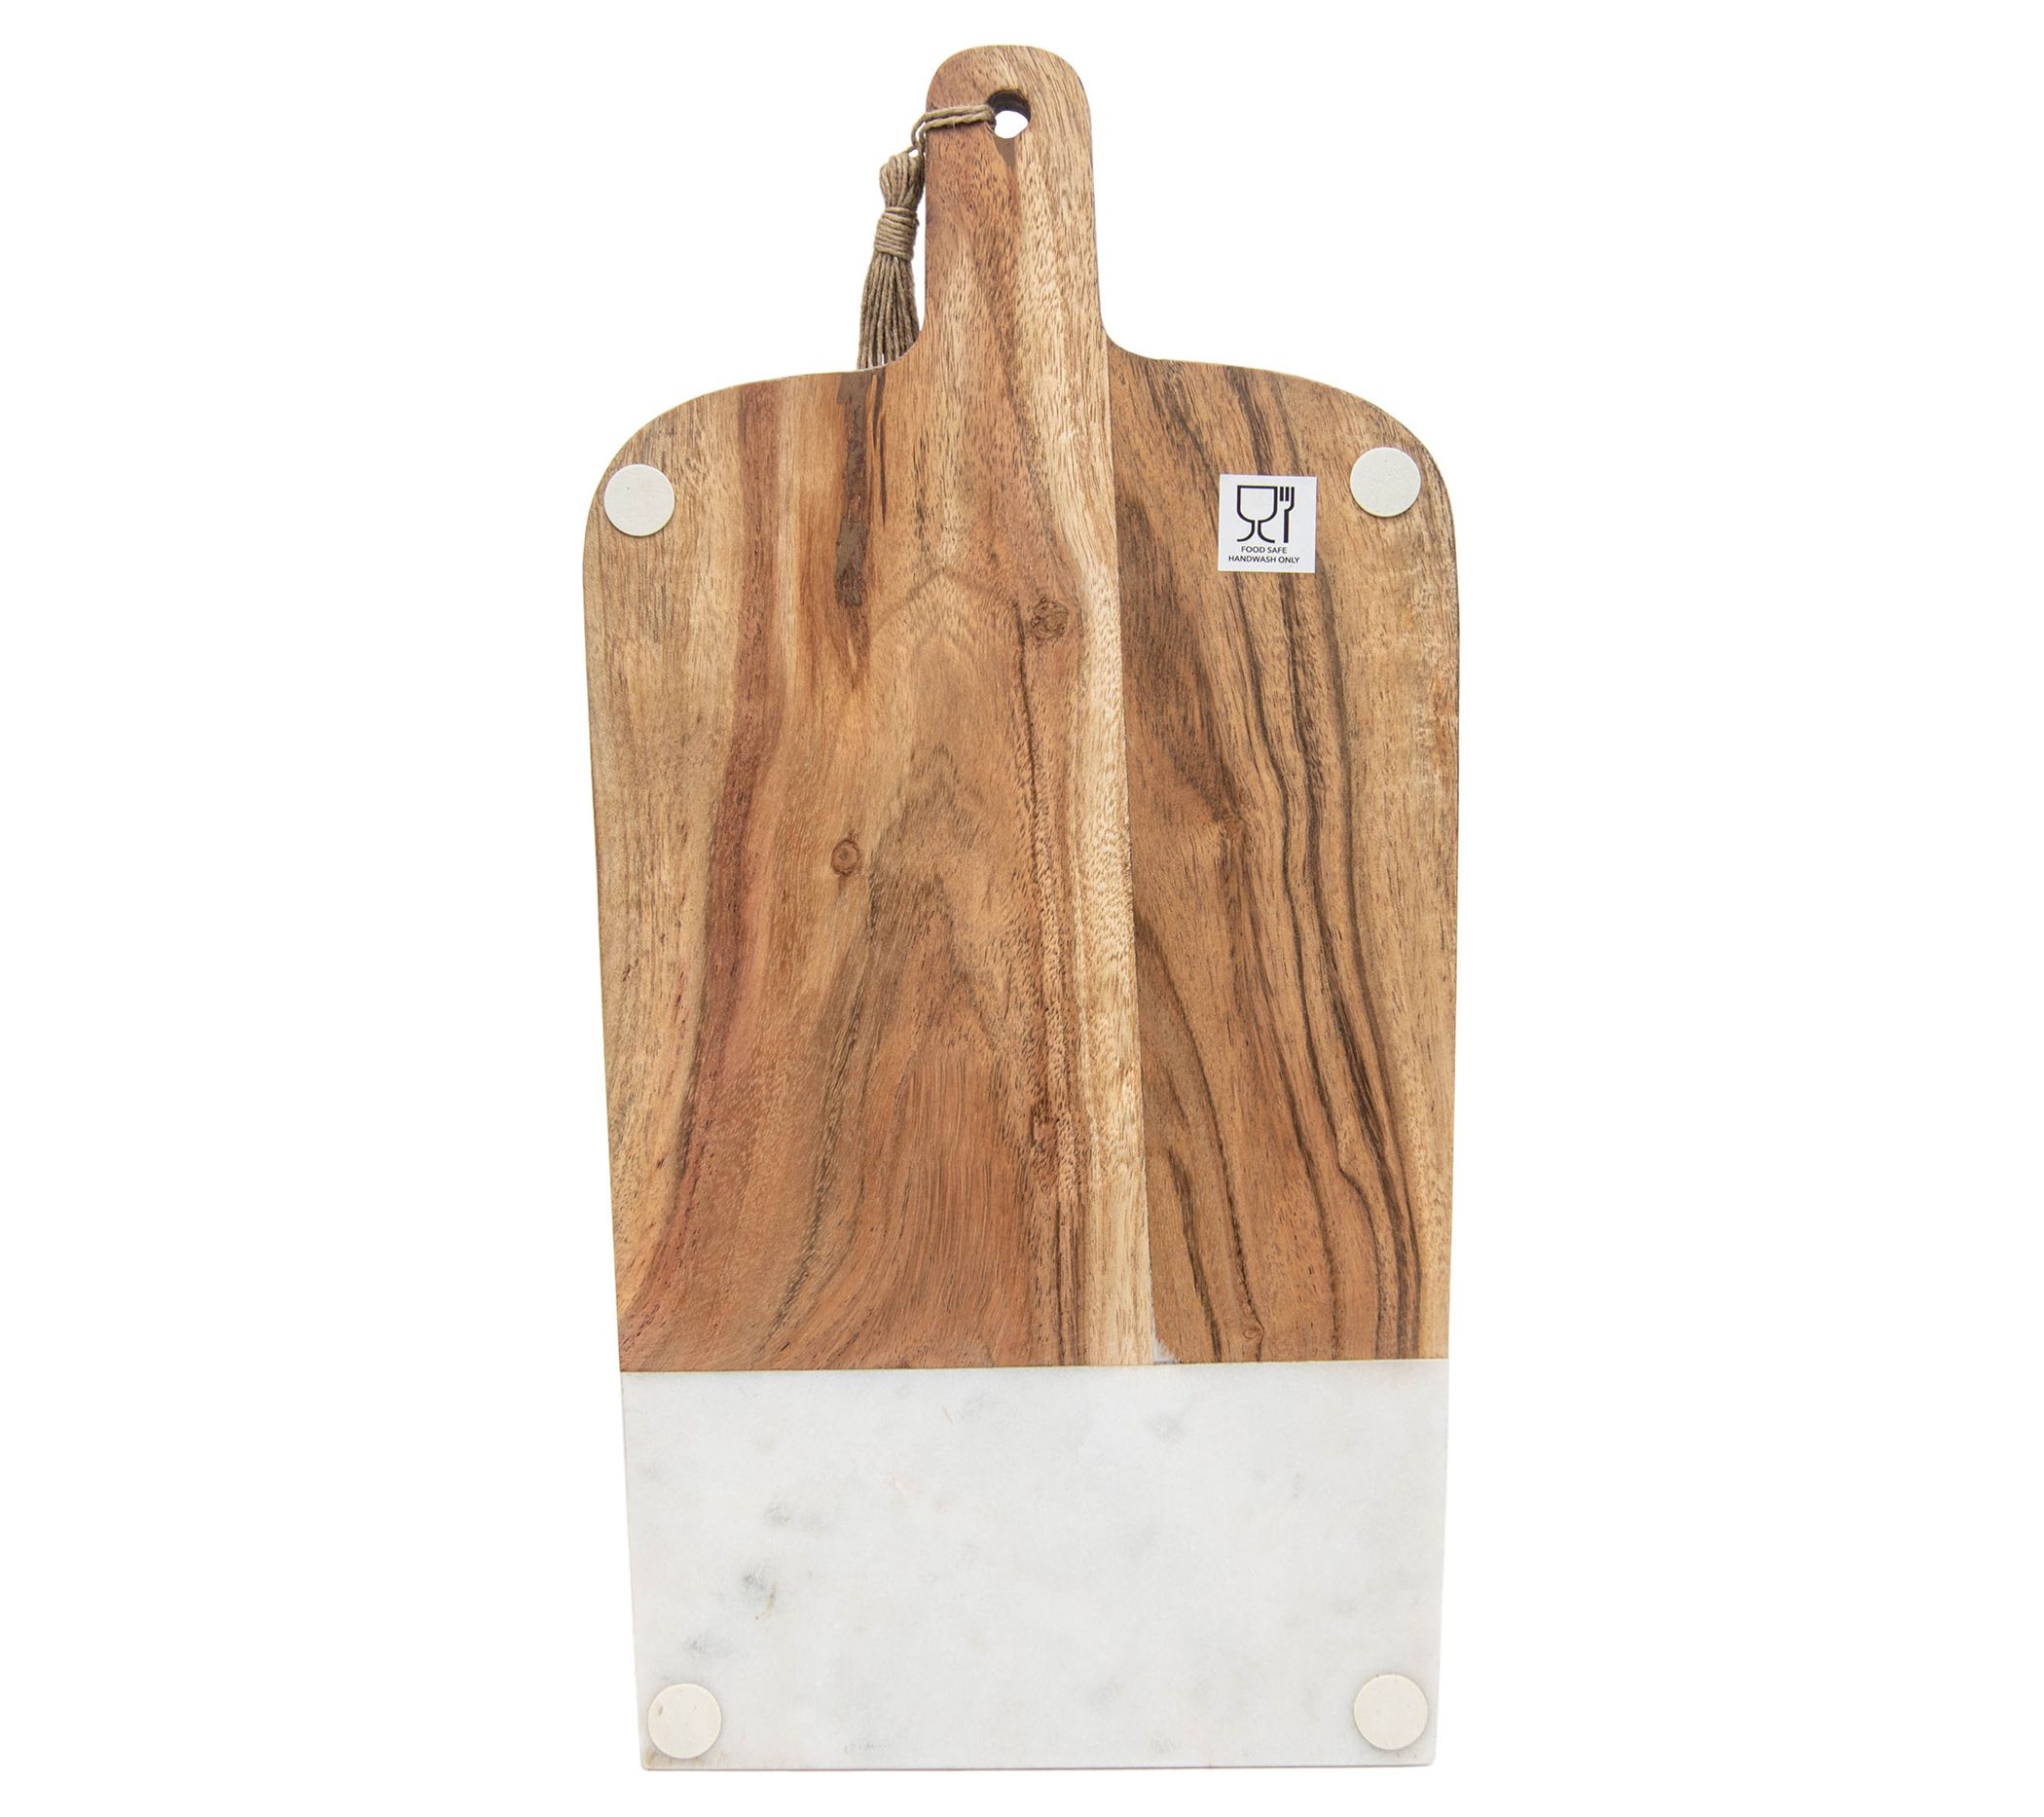 Small Black Wood, Marble & Jute Cutting Board - Foreside Home & Garden